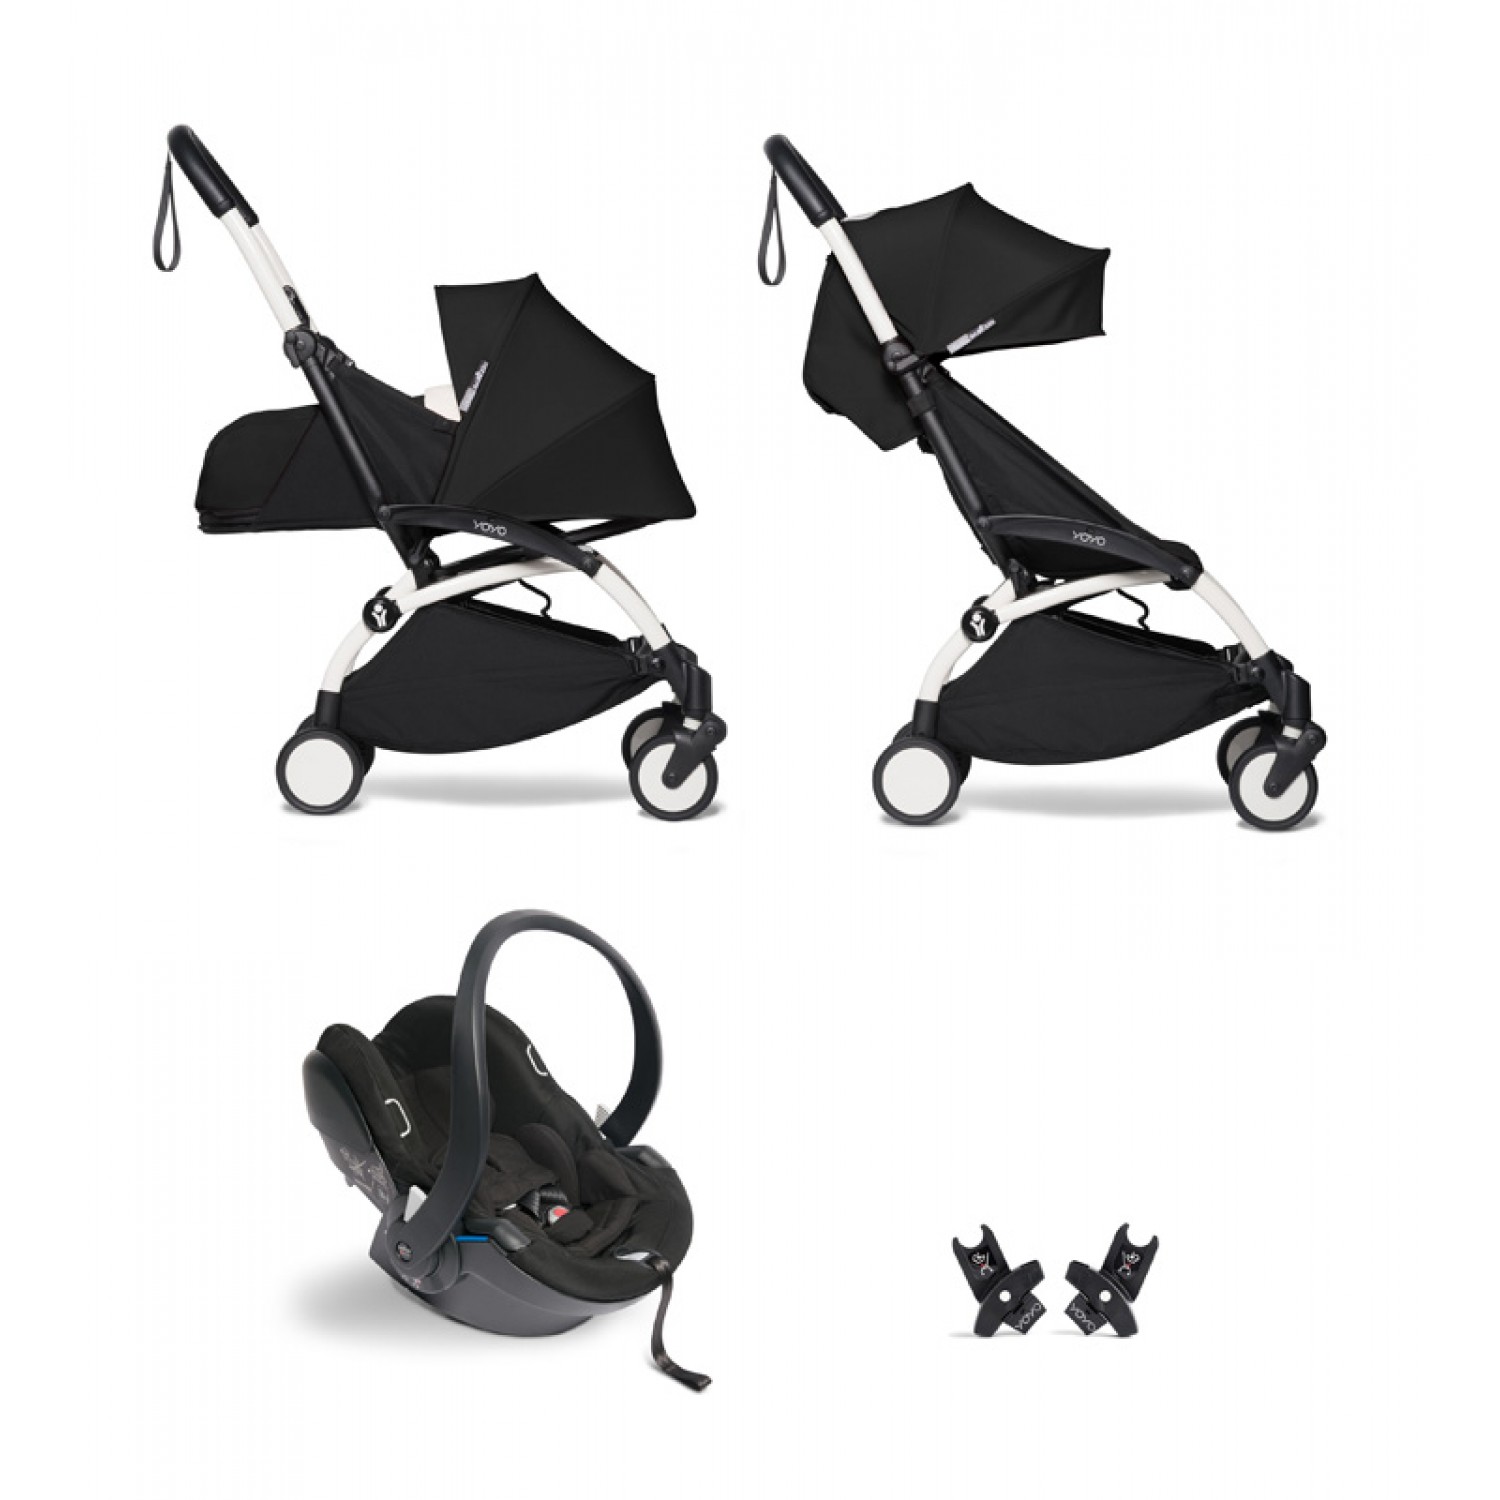 All-in-one BABYZEN stroller YOYO2 0+, car seat and 6+   | White Chassis Black